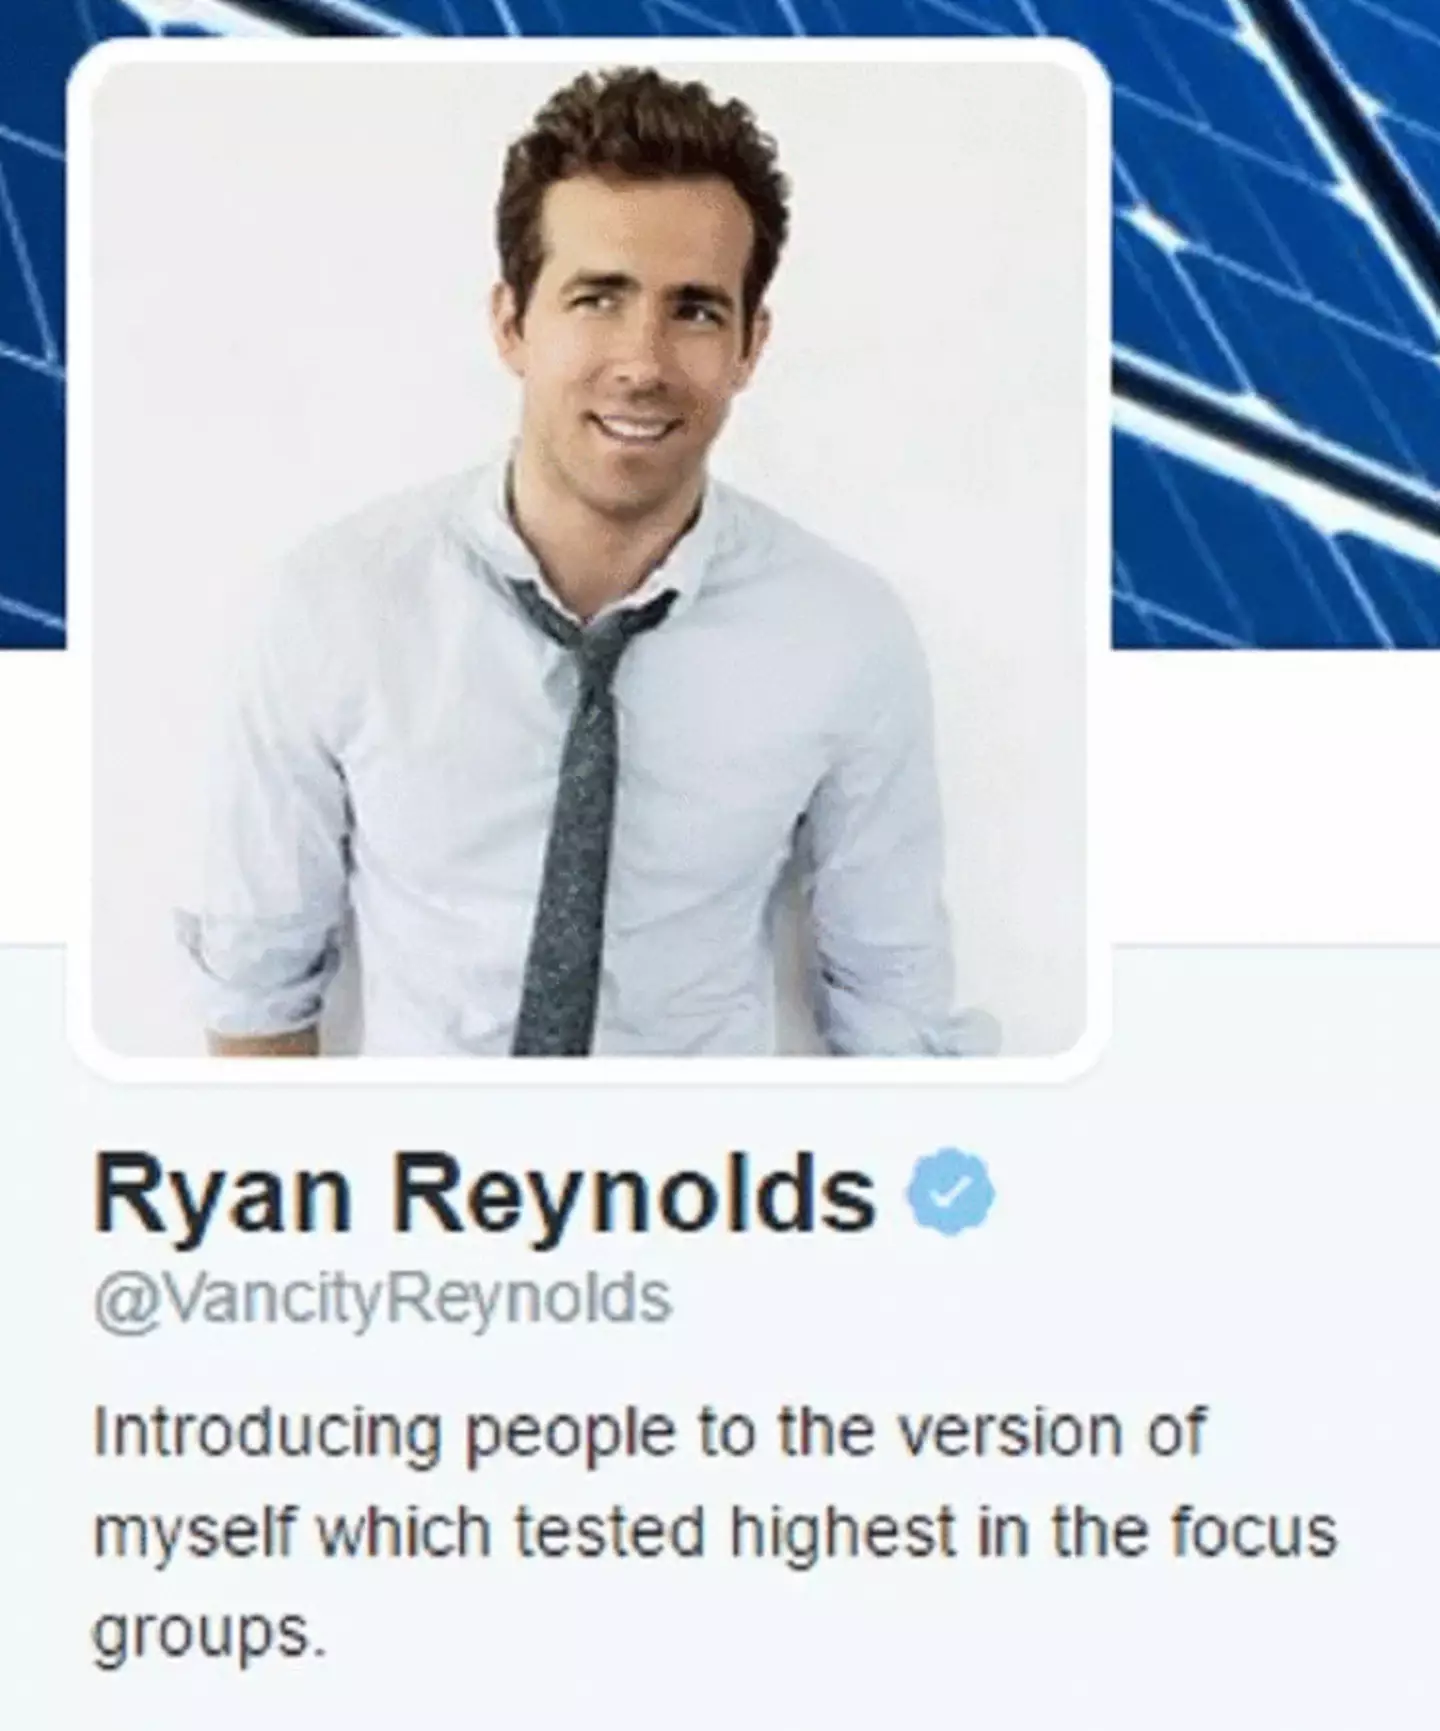 Reynolds' old Twitter bio referred to focus groups.